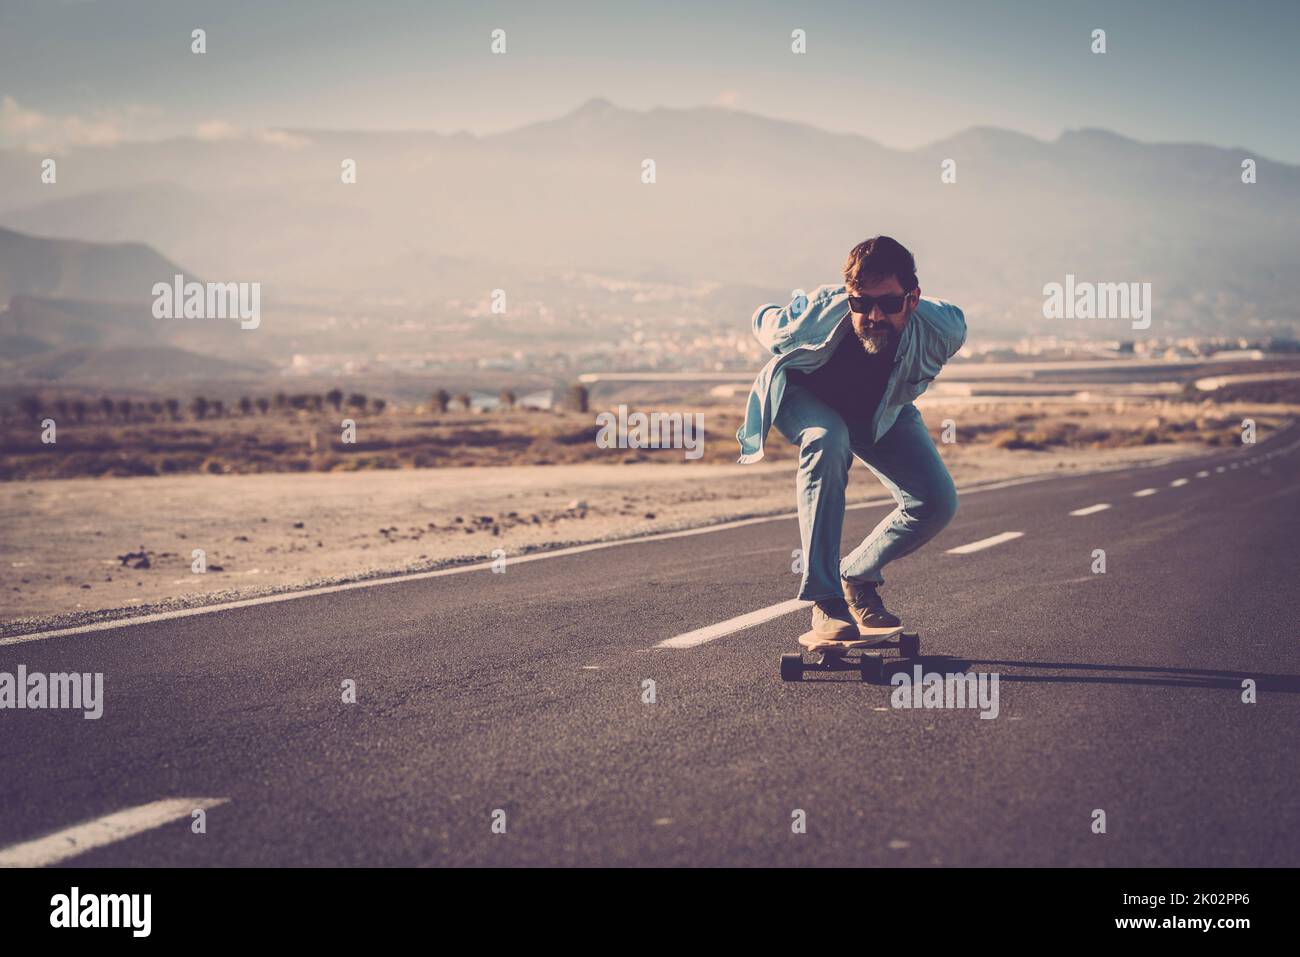 Adult youth man go speed on longboard skate on asphalt road. Mature people enjoy outdoor leisure activity. Freedom and youthful lifestyle concept. Enjoying life and scenic place Stock Photo